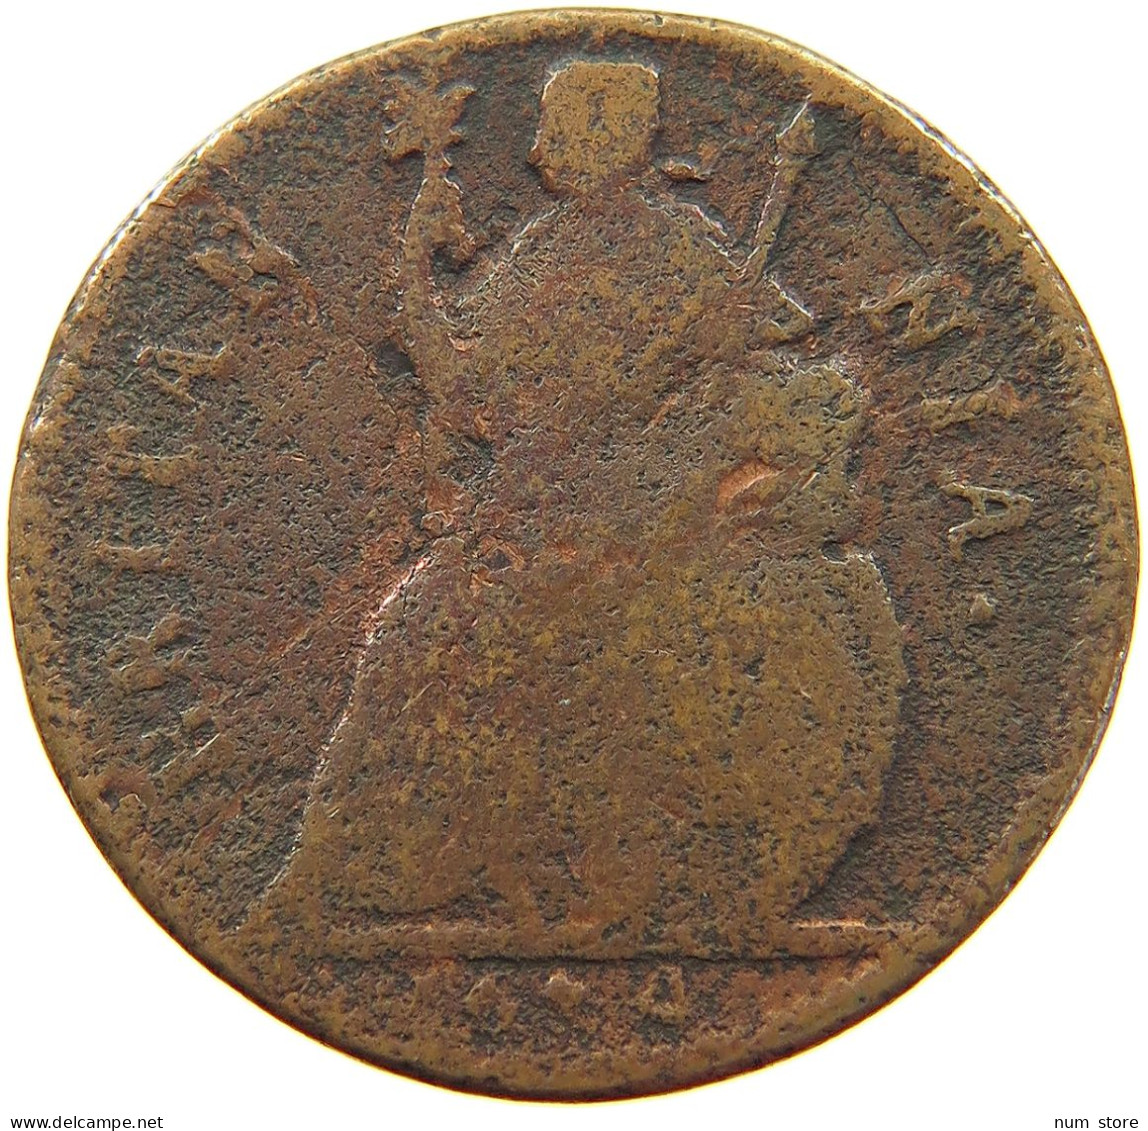 GREAT BRITAIN FARTHING 1674 Charles II (1660-1685) #a016 0233 - A. 1 Farthing